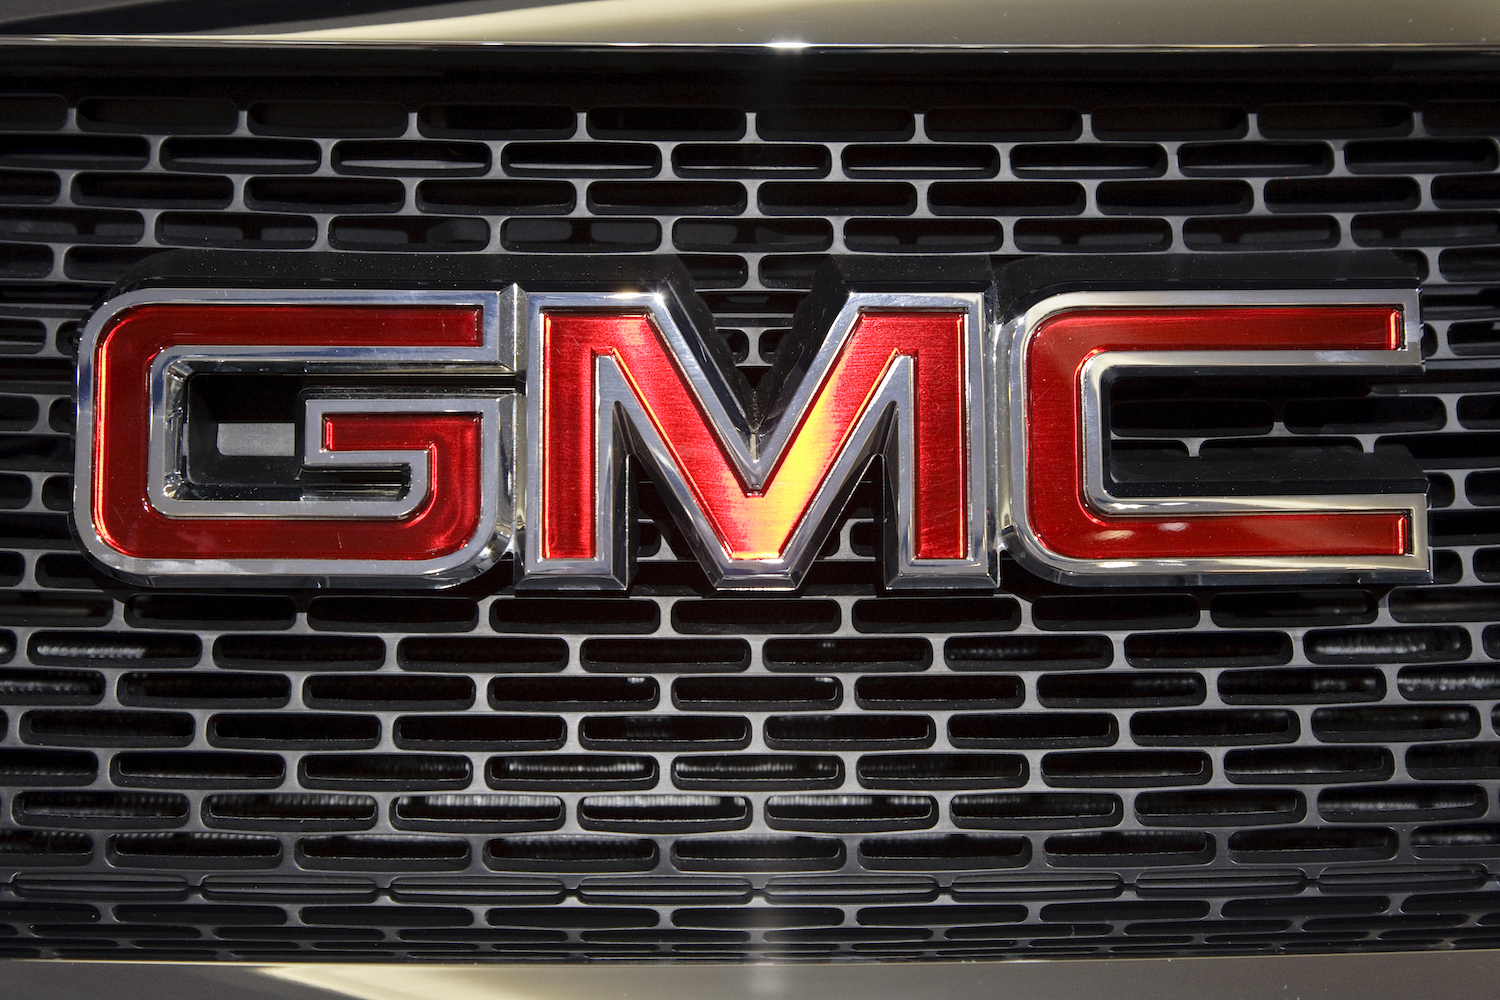 Closeup of a classic General Motors Company GMC logo on the grille of a truck at an auto show.